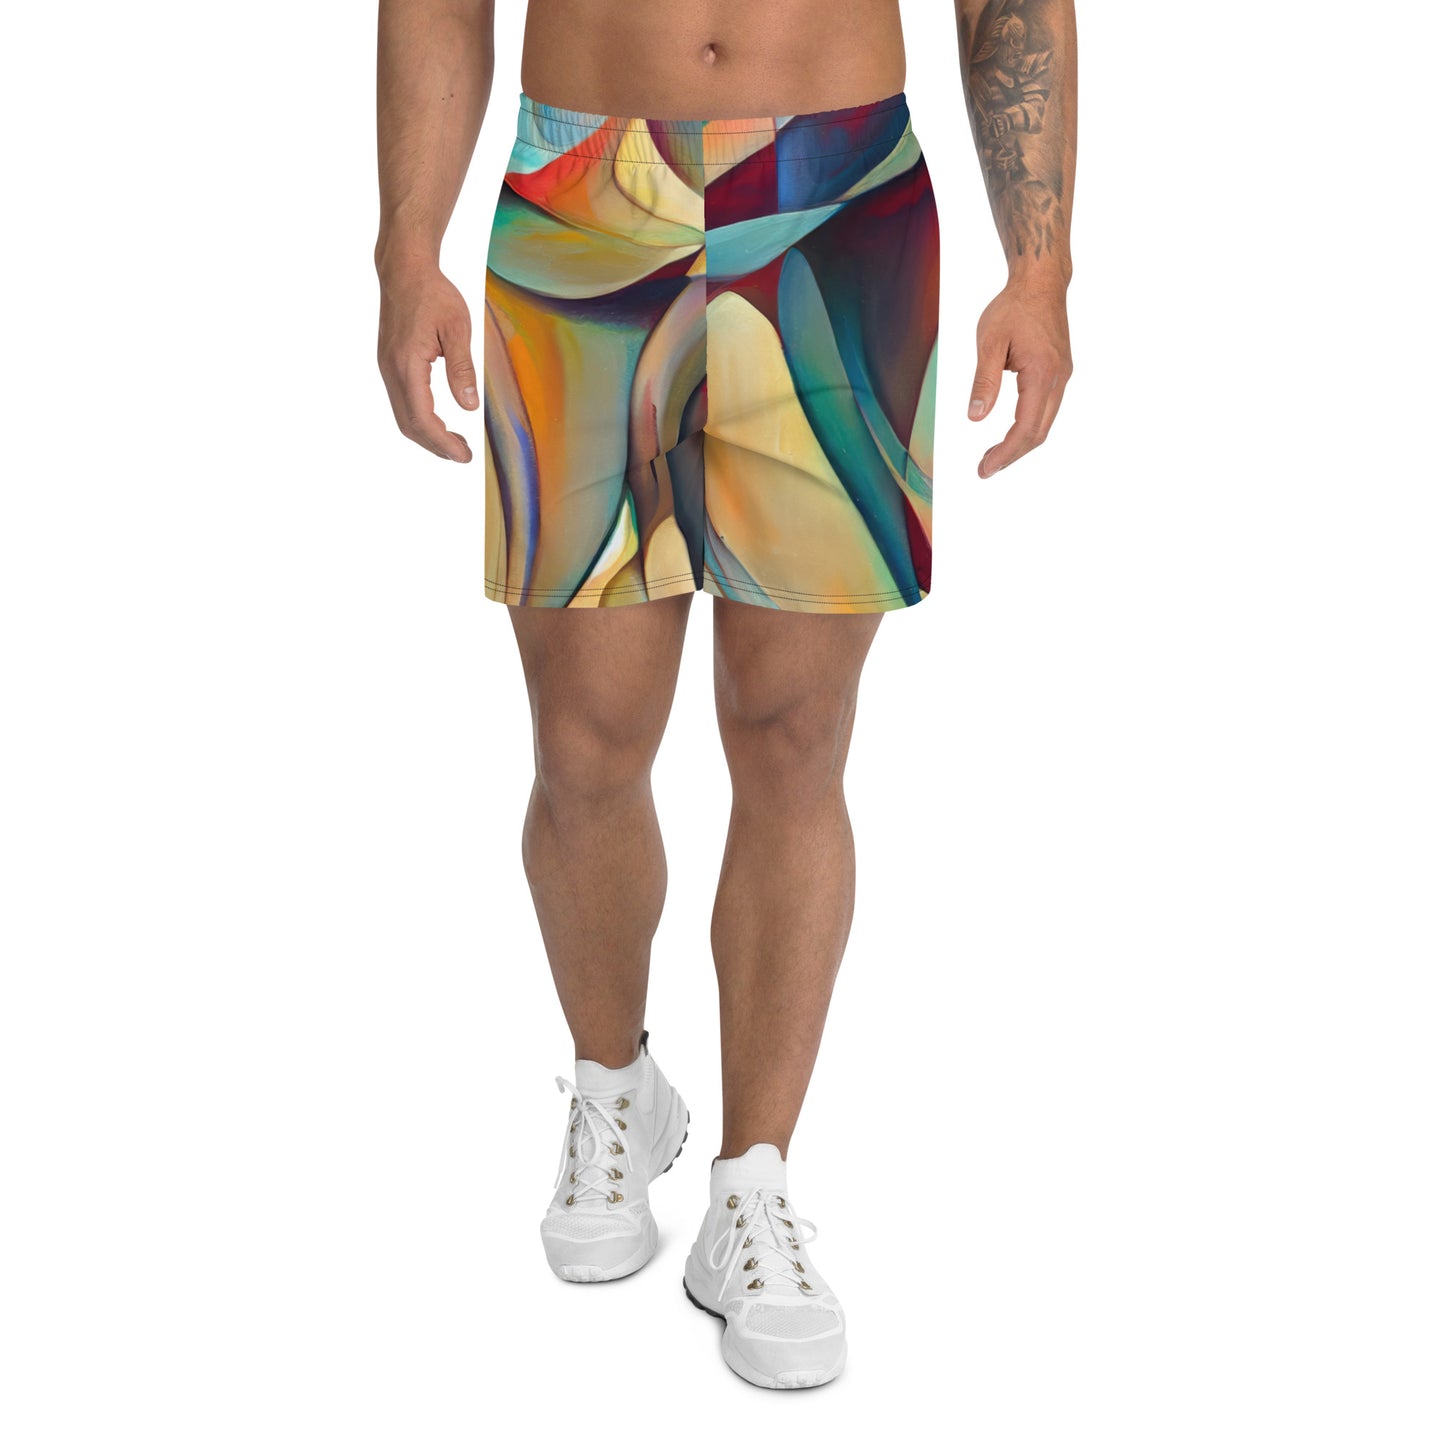 DMV 0243 Abstract Art Men's Recycled Athletic Shorts